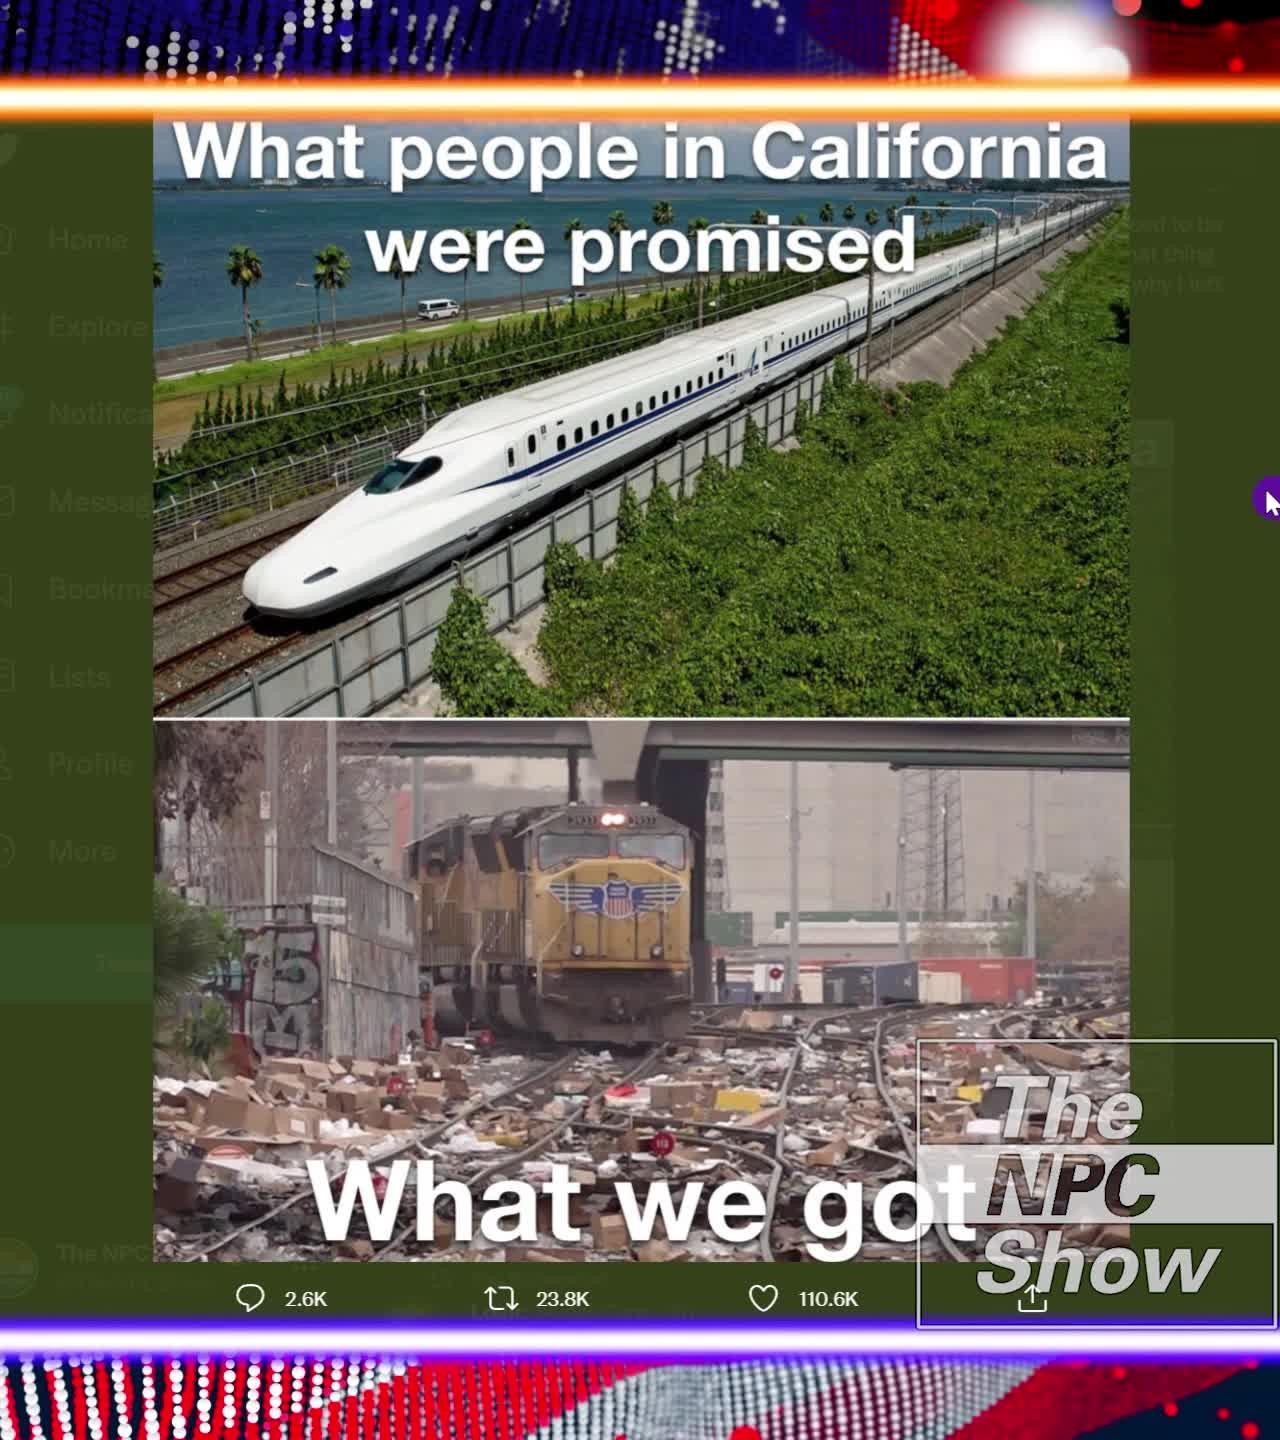 California Bullet Train Project Was A Tax Scam